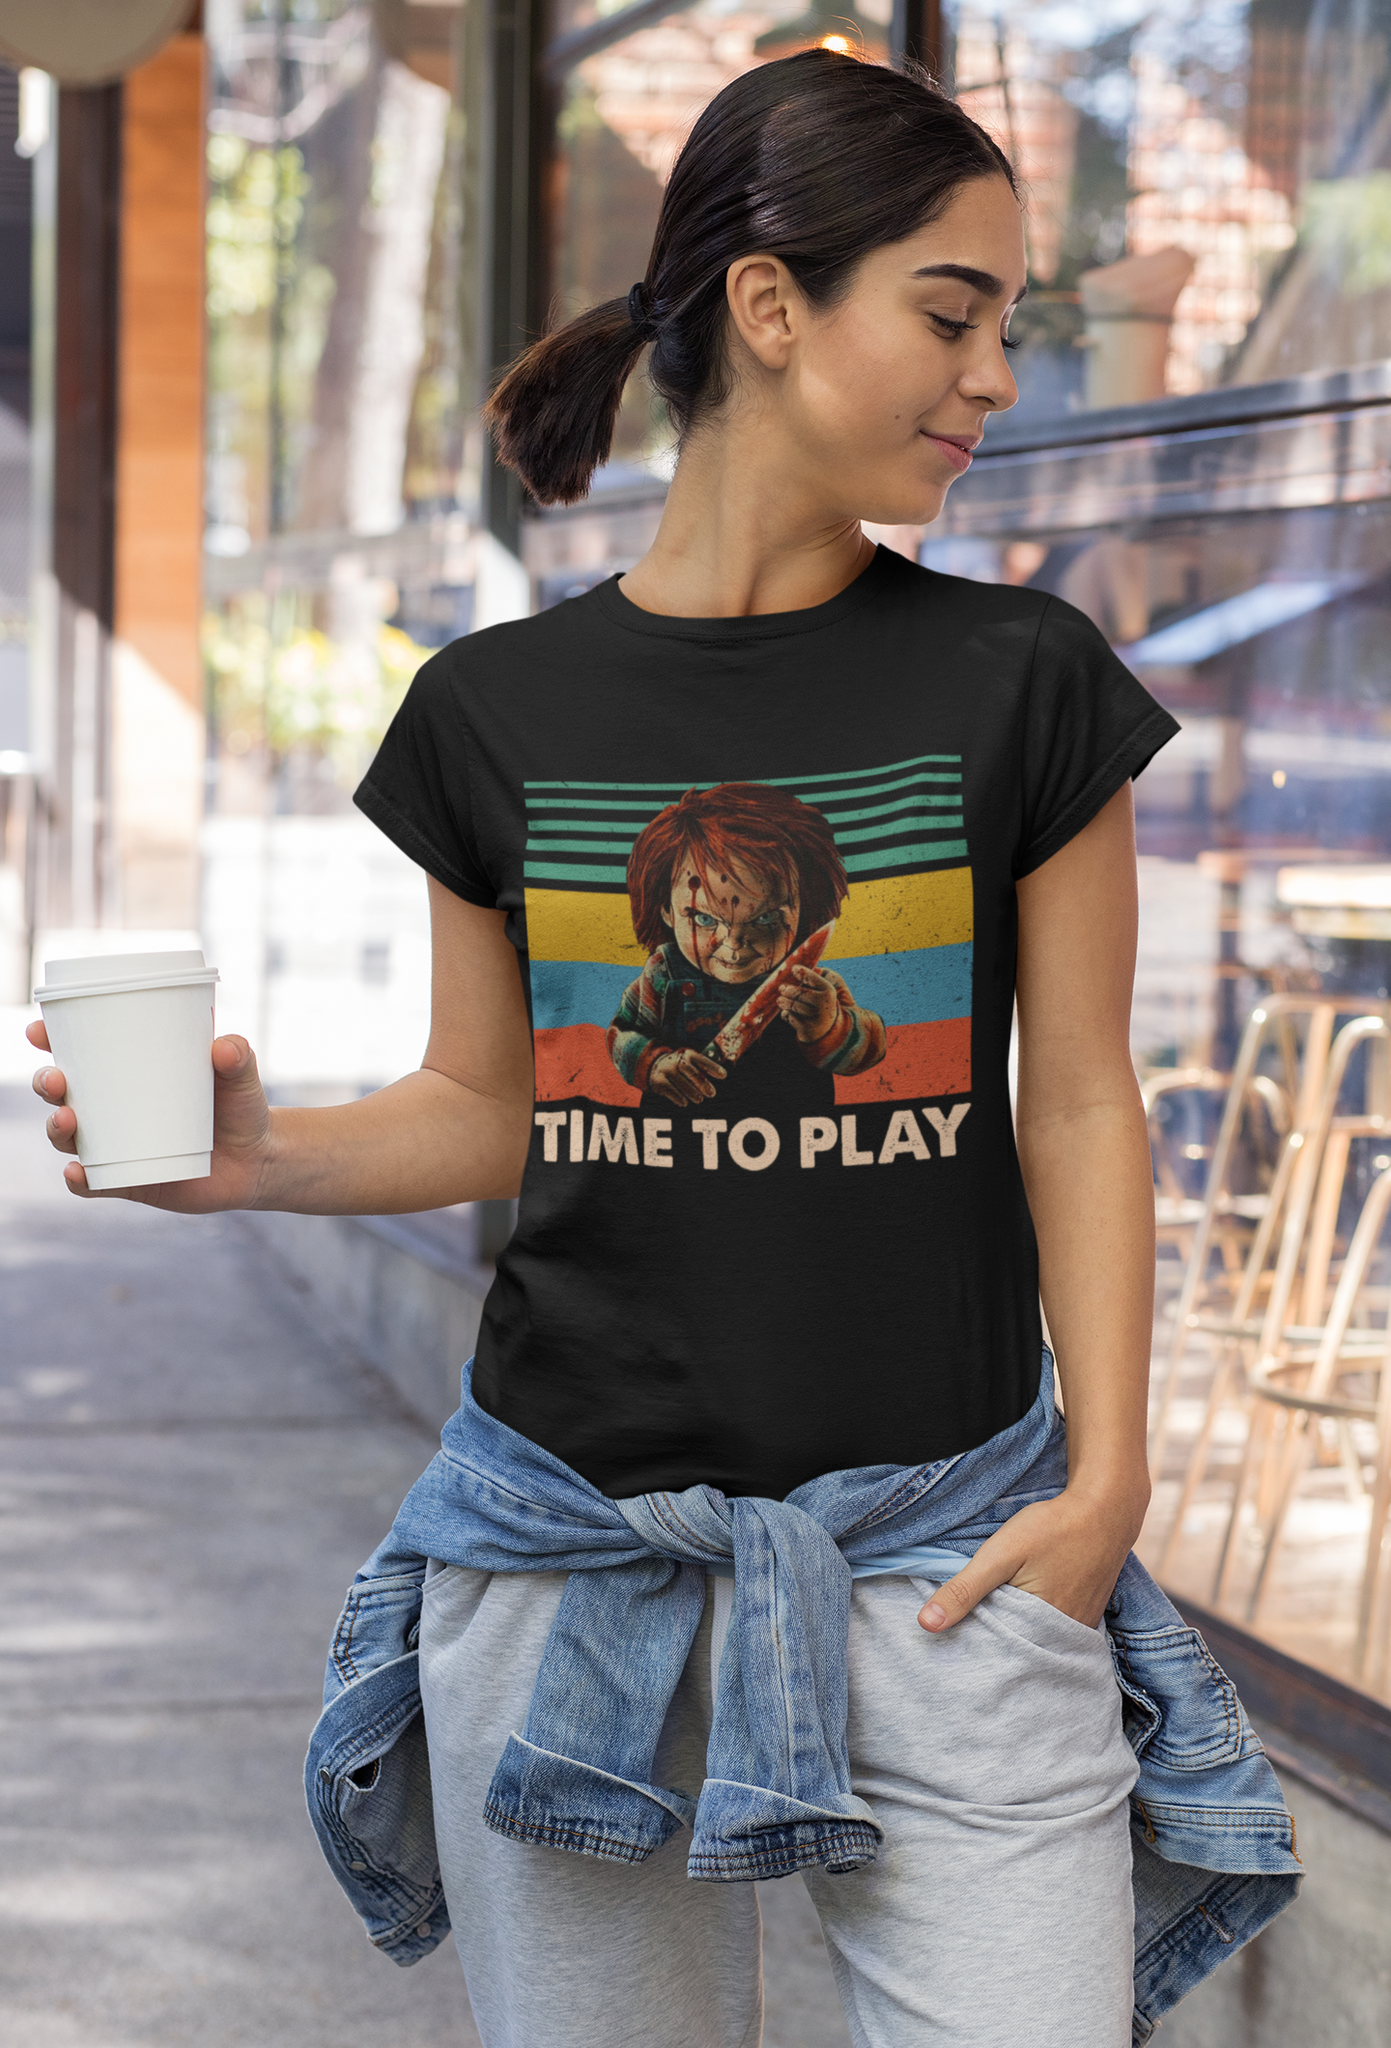 Chucky Vintage T Shirt, Time To Play T Shirt, Horror Character Shirt, Halloween Gifts